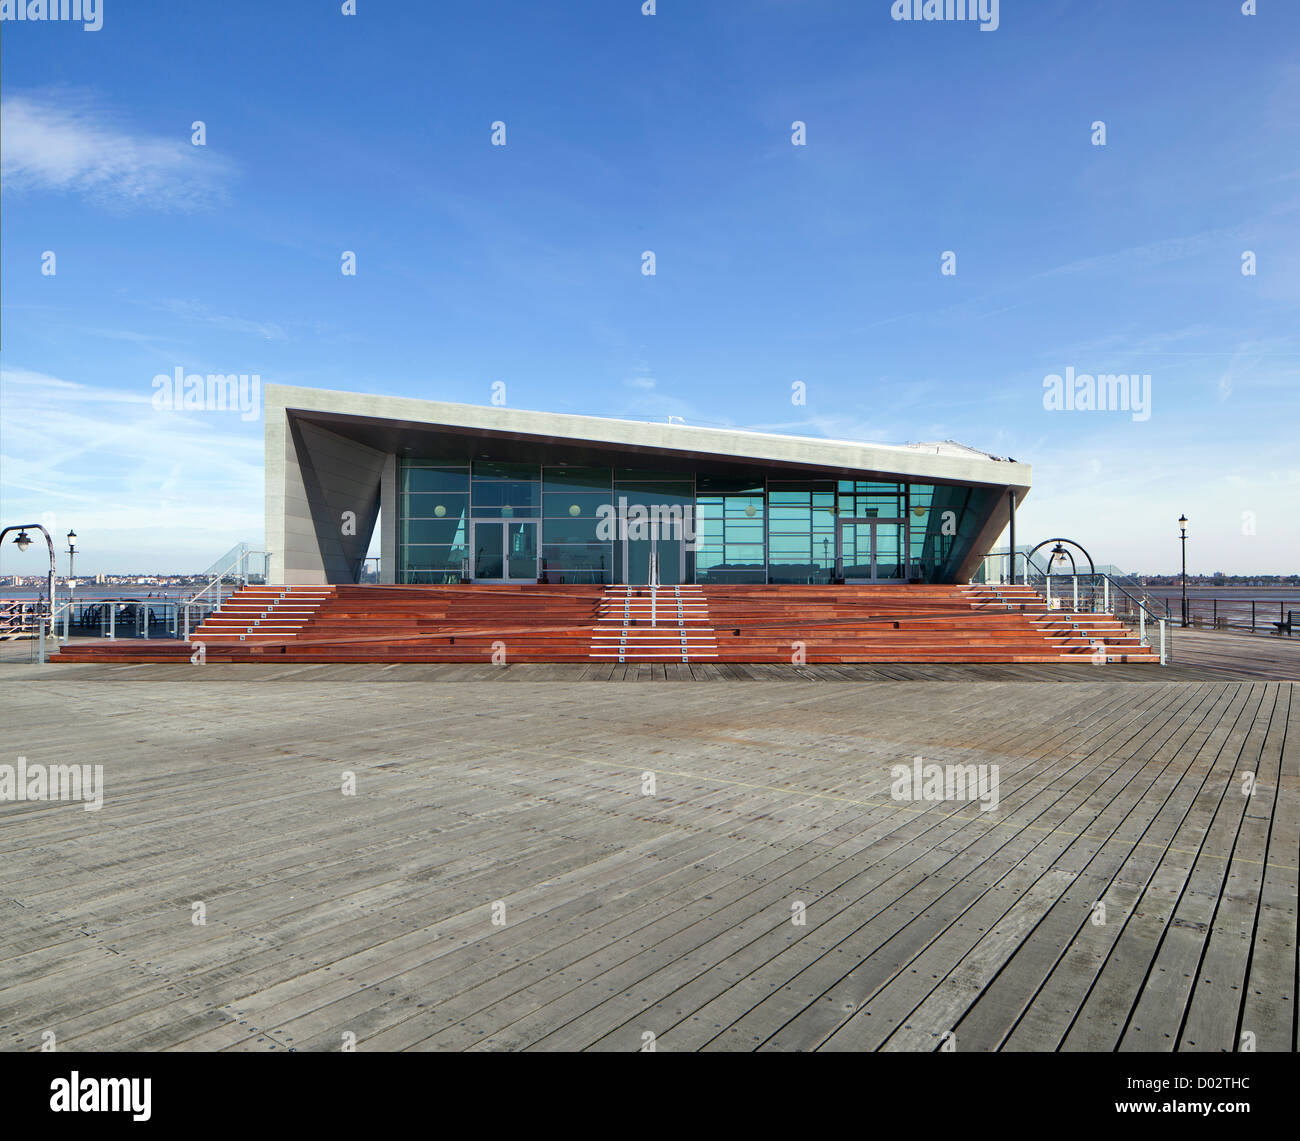 Southend Pier Cultural Centre, Southend, United Kingdom. Architect: White Architects, 2012. Early morning view of the main entra Stock Photo